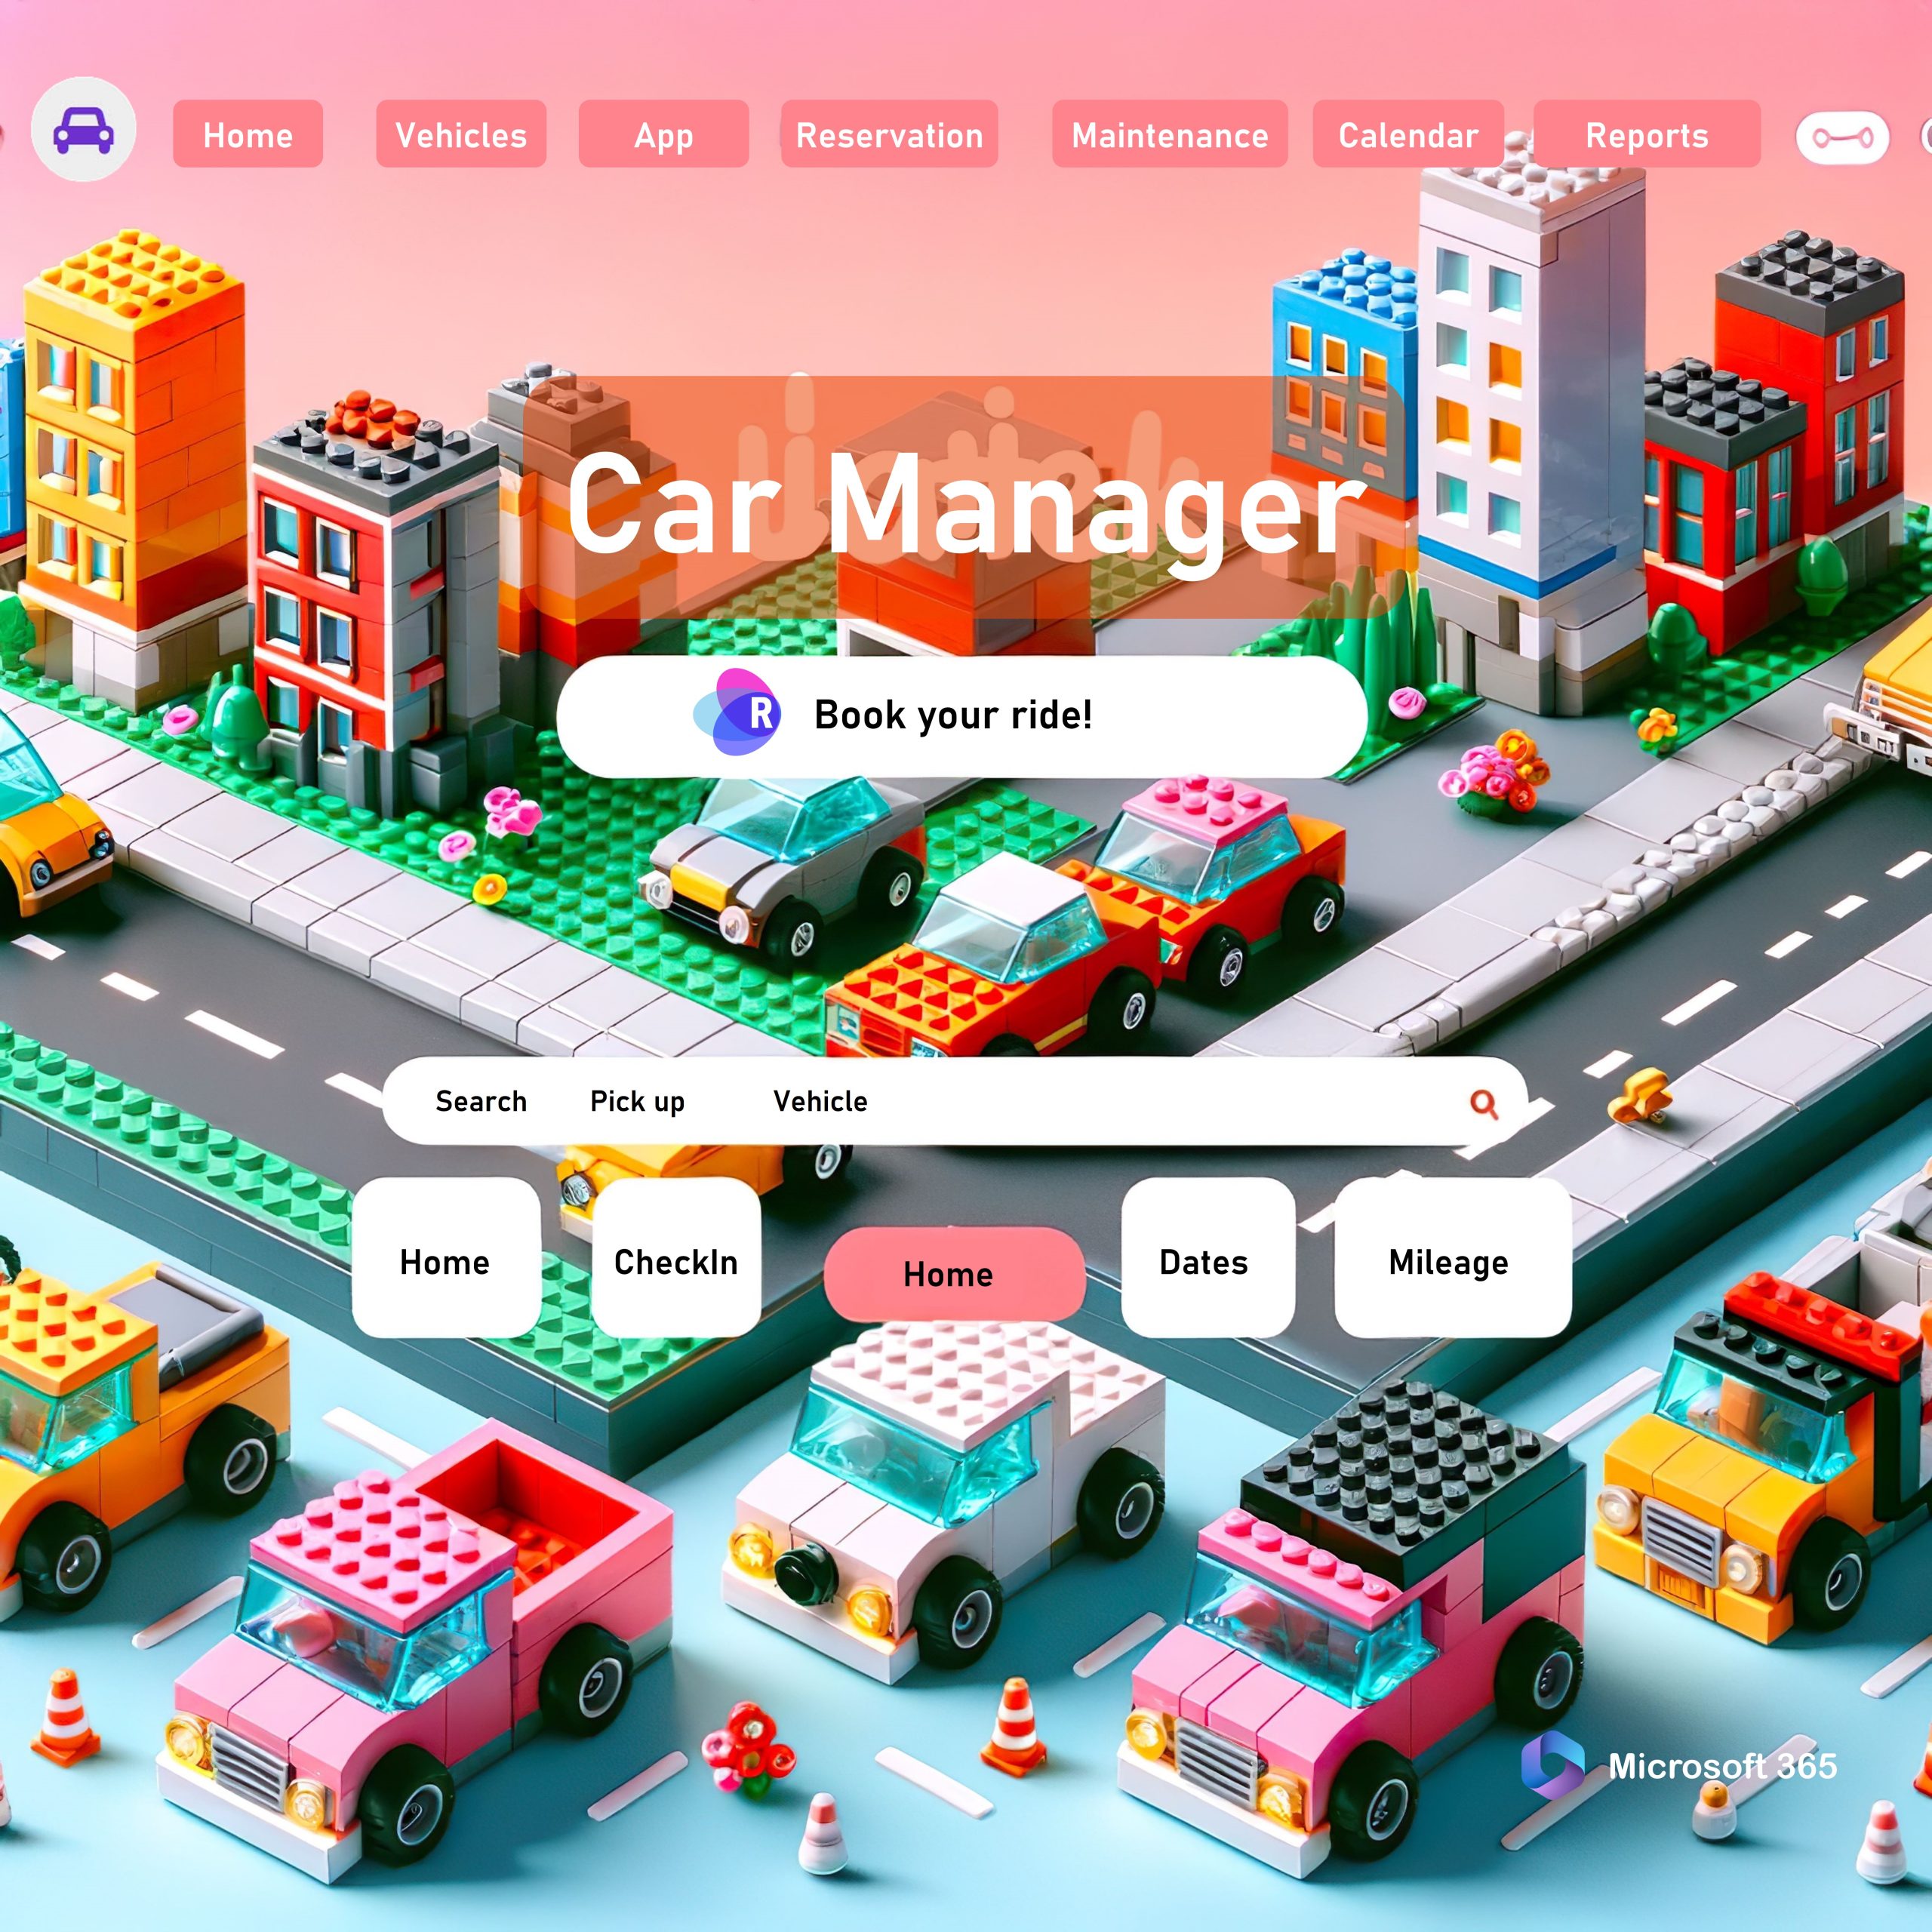 Vehicle Scheduler by Room Manager: Advanced Booking for Office Cars and Fleet Management